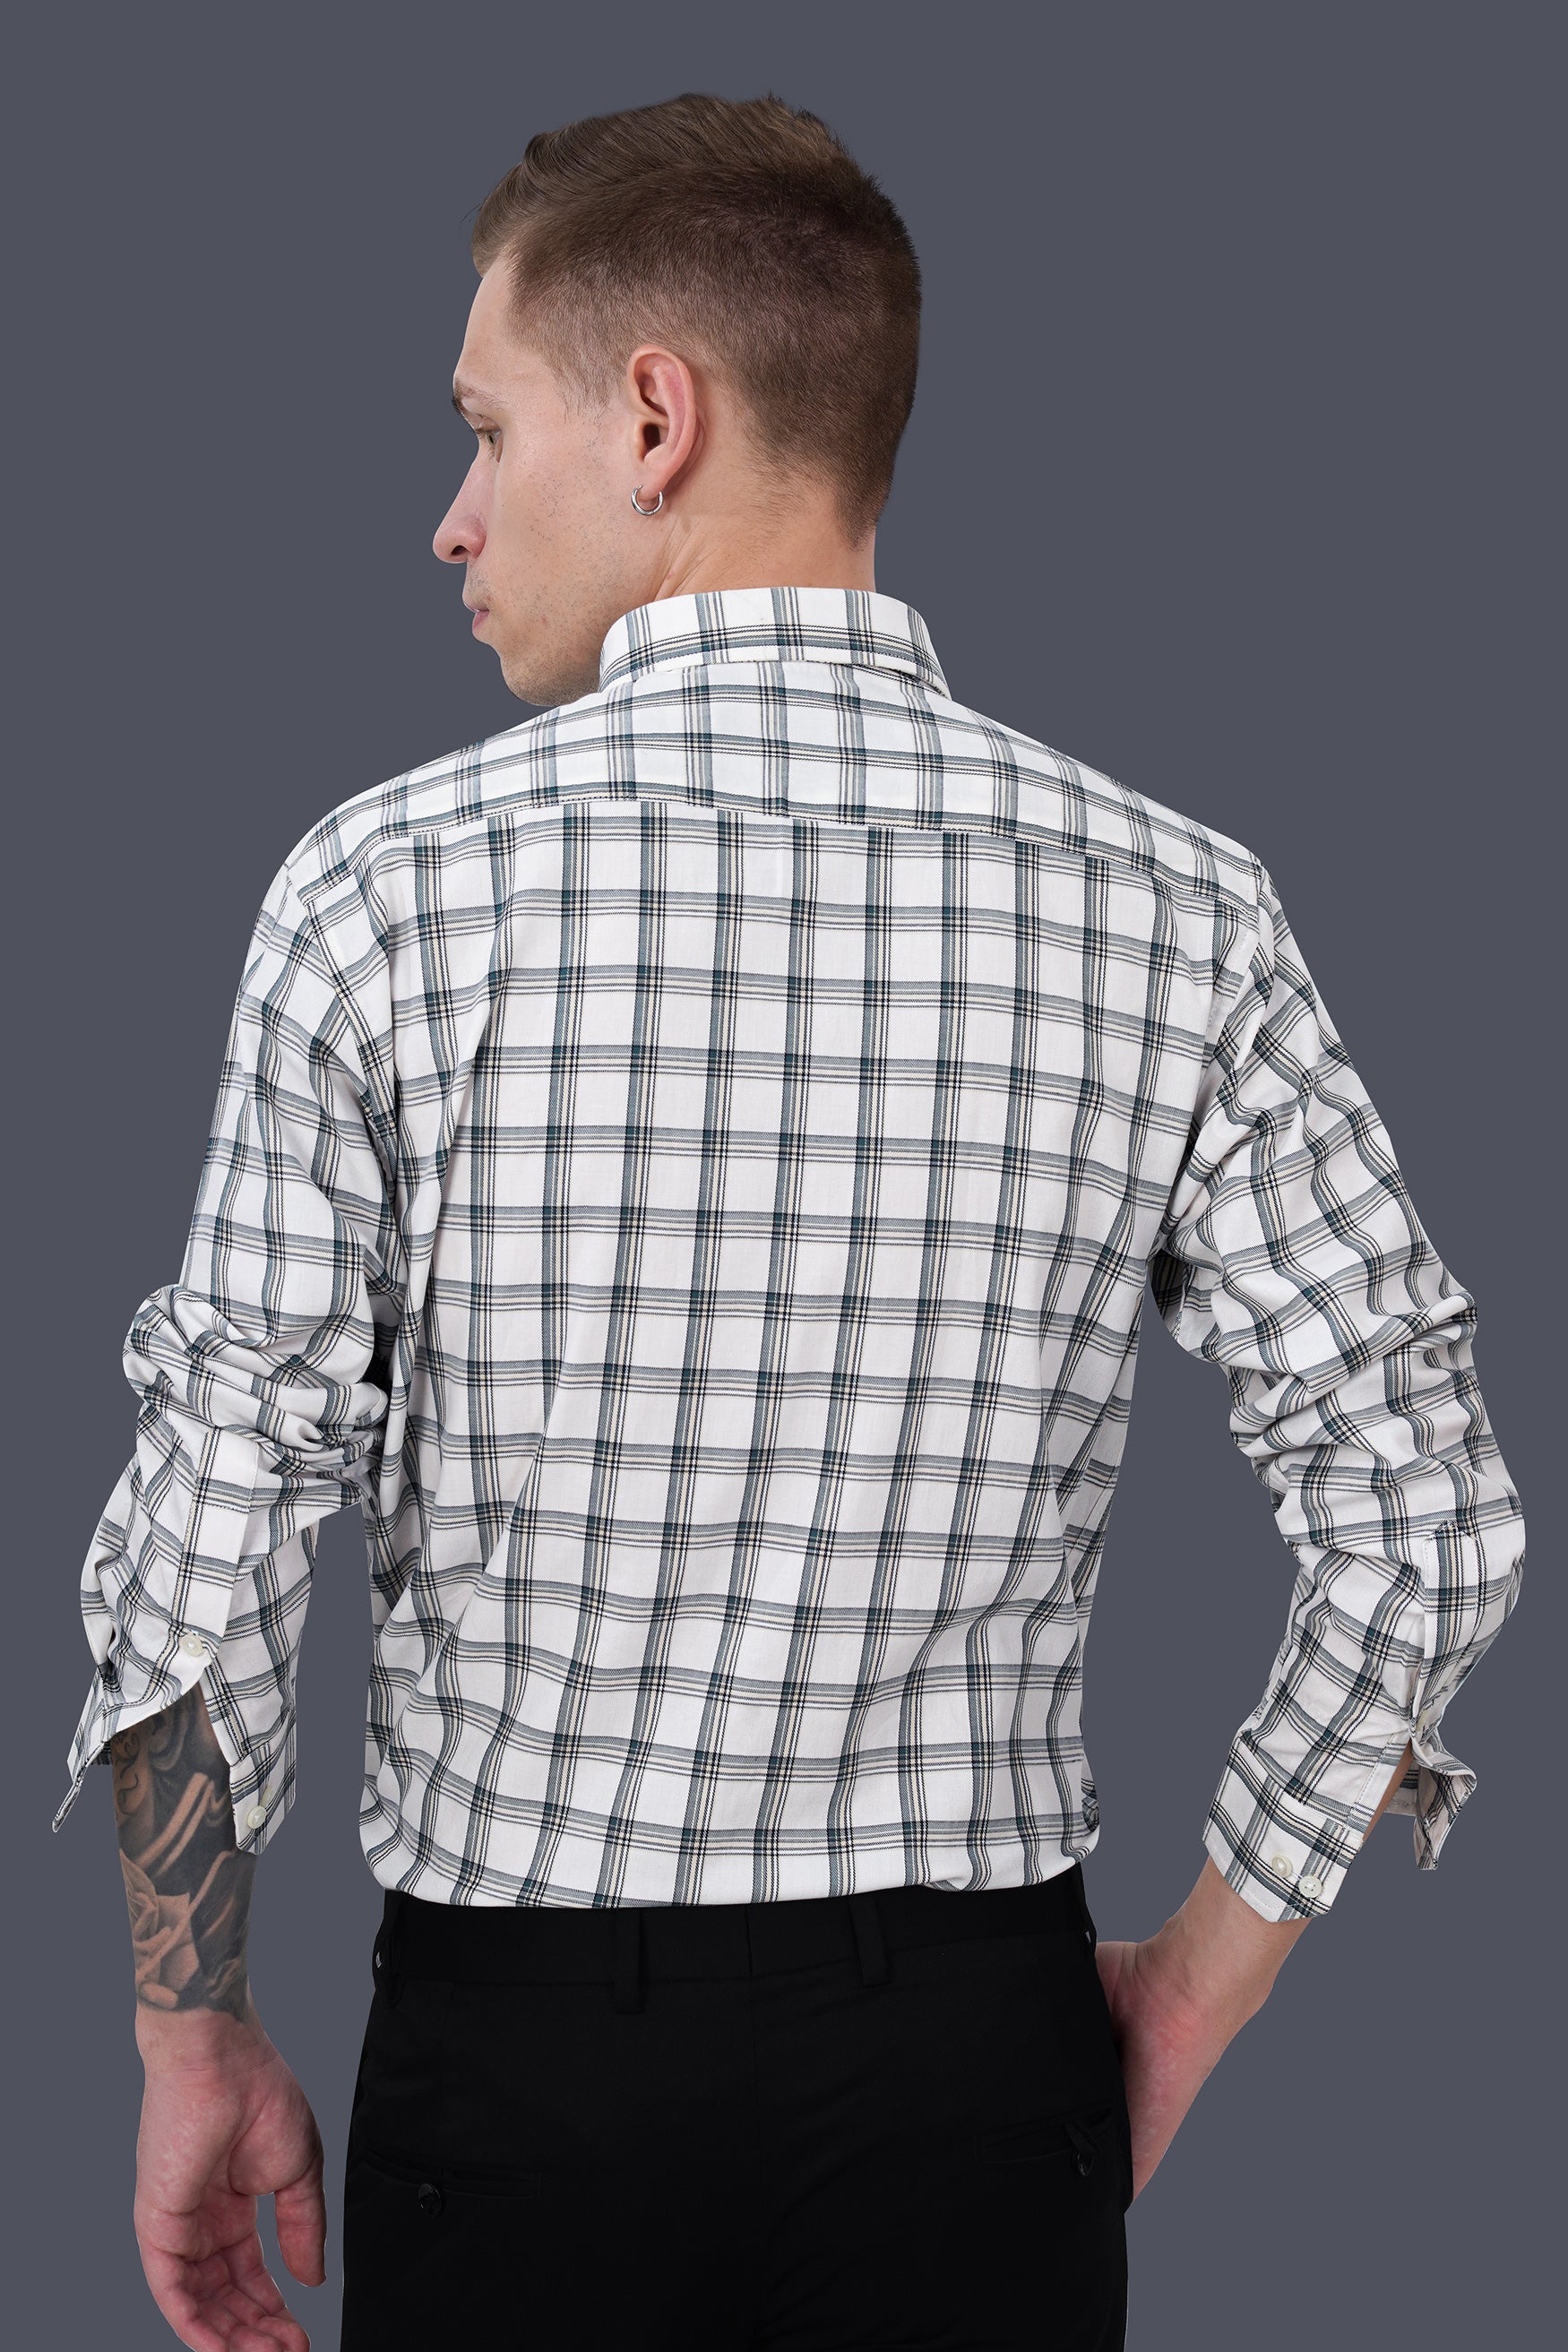 Bright White and Casal Blue Twill Plaid Premium Cotton Shirt 11753-BD-38, 11753-BD-H-38, 11753-BD-39, 11753-BD-H-39, 11753-BD-40, 11753-BD-H-40, 11753-BD-42, 11753-BD-H-42, 11753-BD-44, 11753-BD-H-44, 11753-BD-46, 11753-BD-H-46, 11753-BD-48, 11753-BD-H-48, 11753-BD-50, 11753-BD-H-50, 11753-BD-52, 11753-BD-H-52